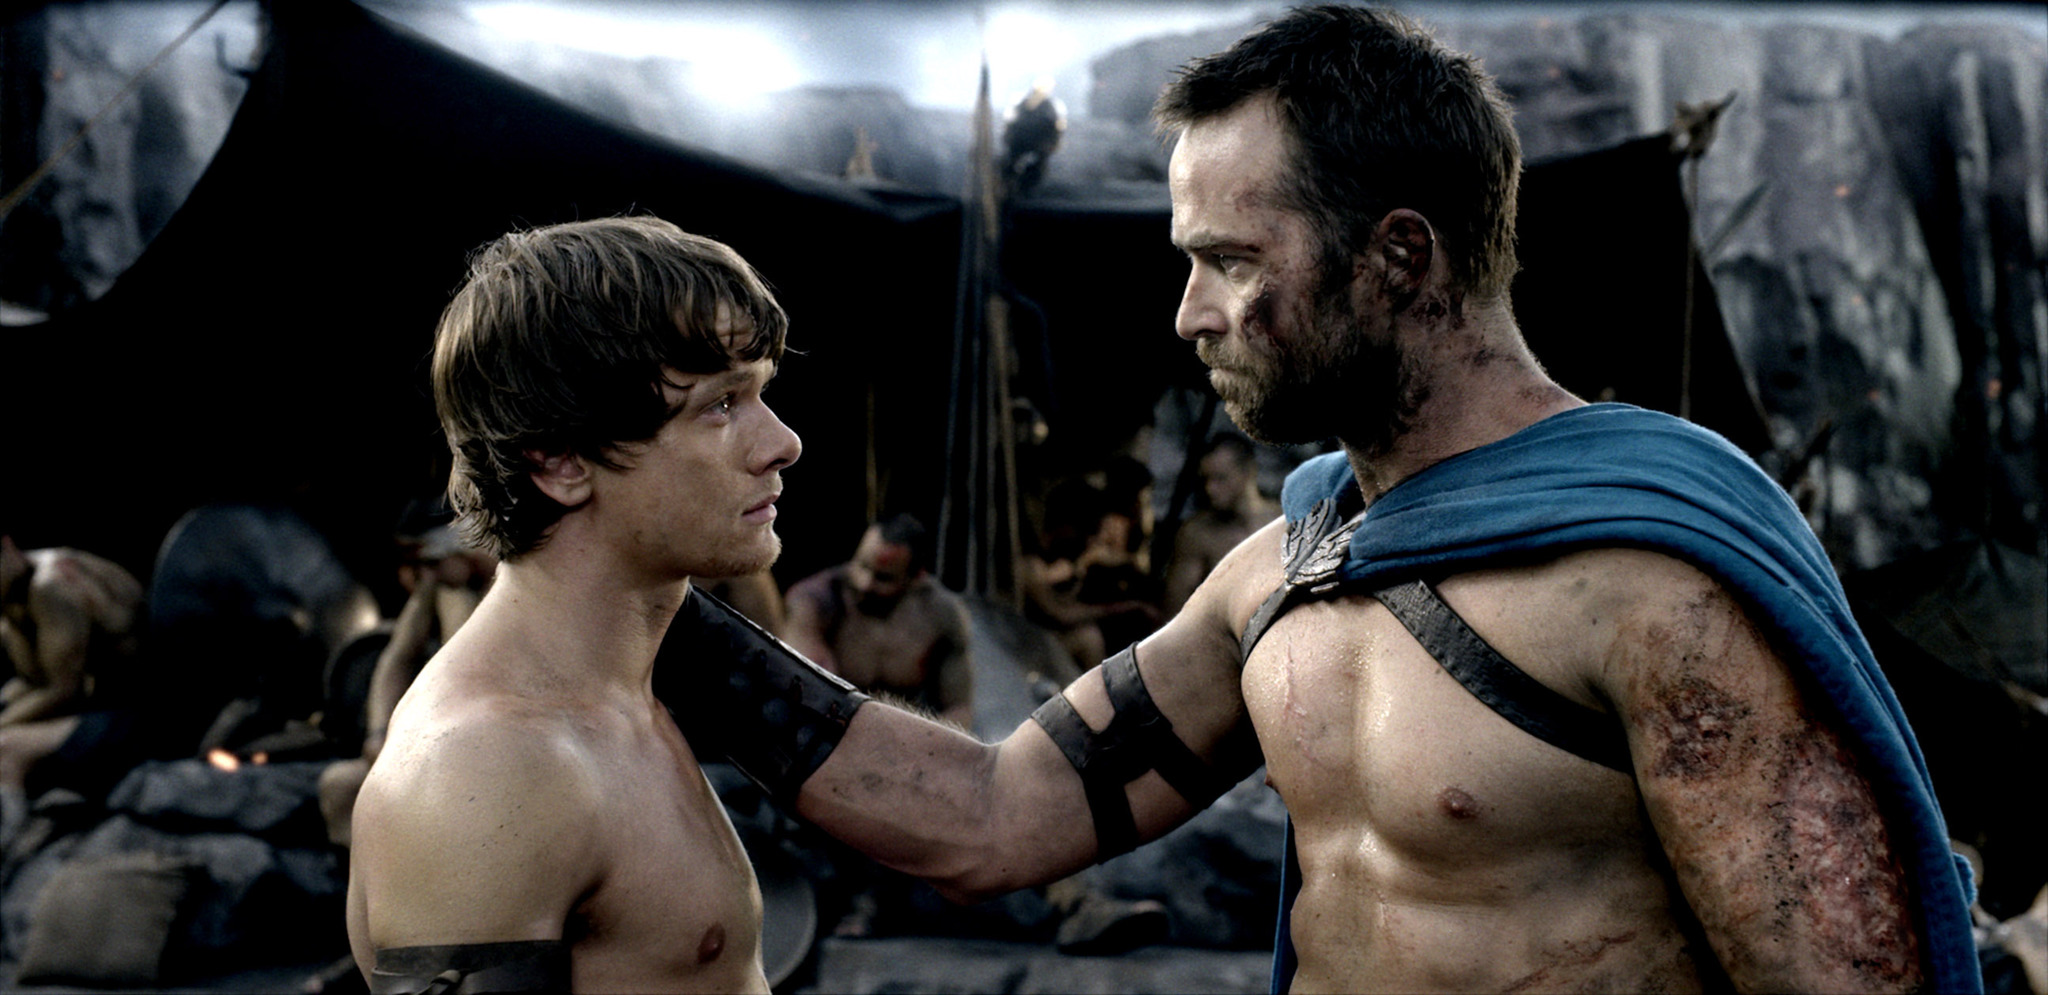 Still of Sullivan Stapleton and Jack O'Connell in 300: Imperijos gimimas (2014)